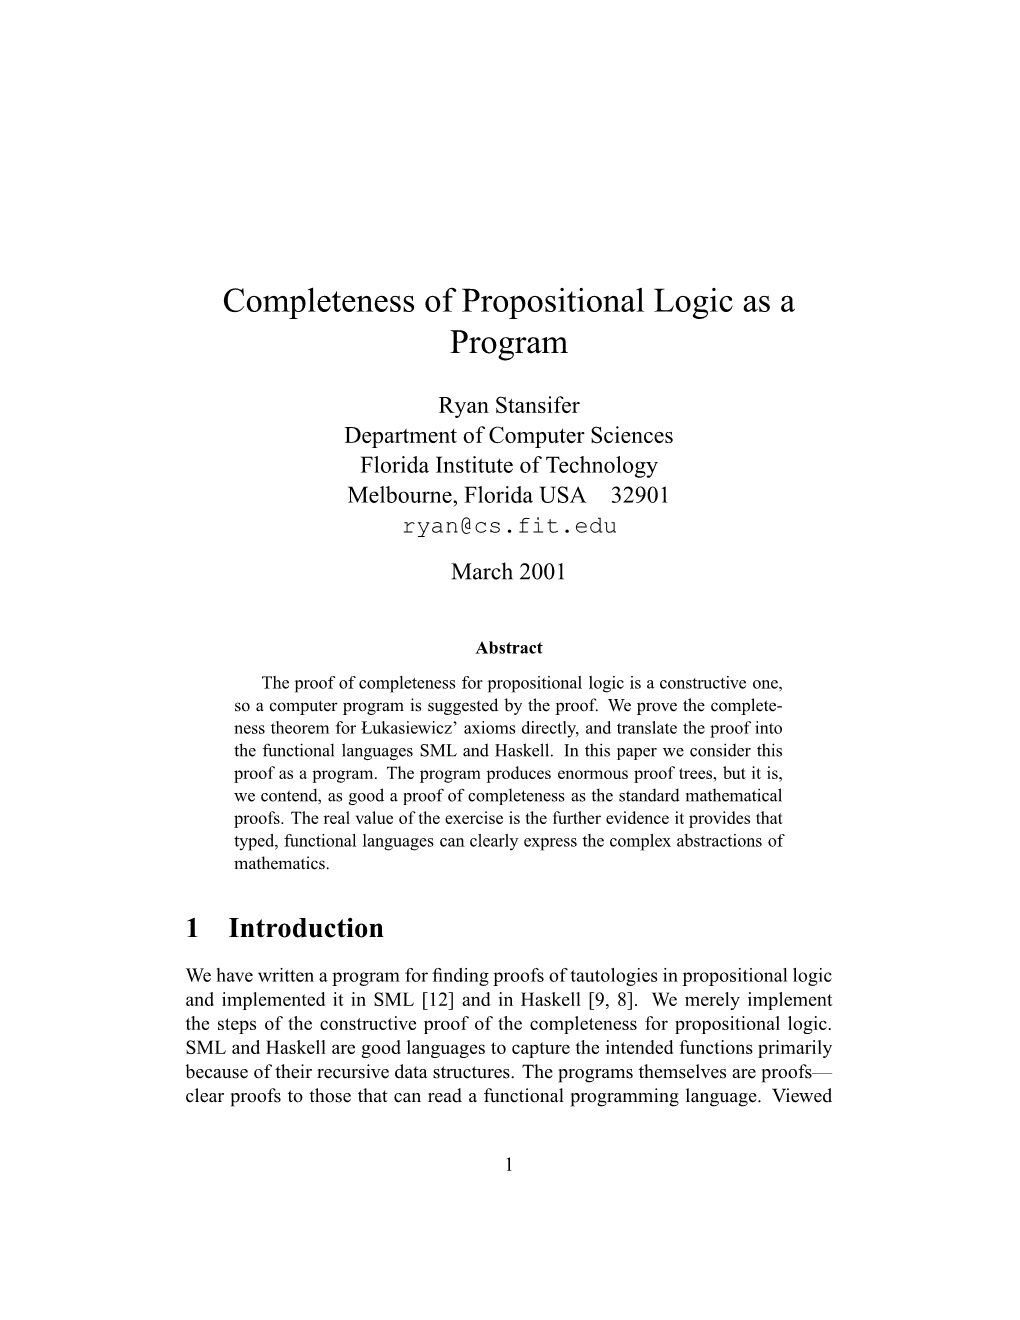 Completeness of Propositional Logic As a Program